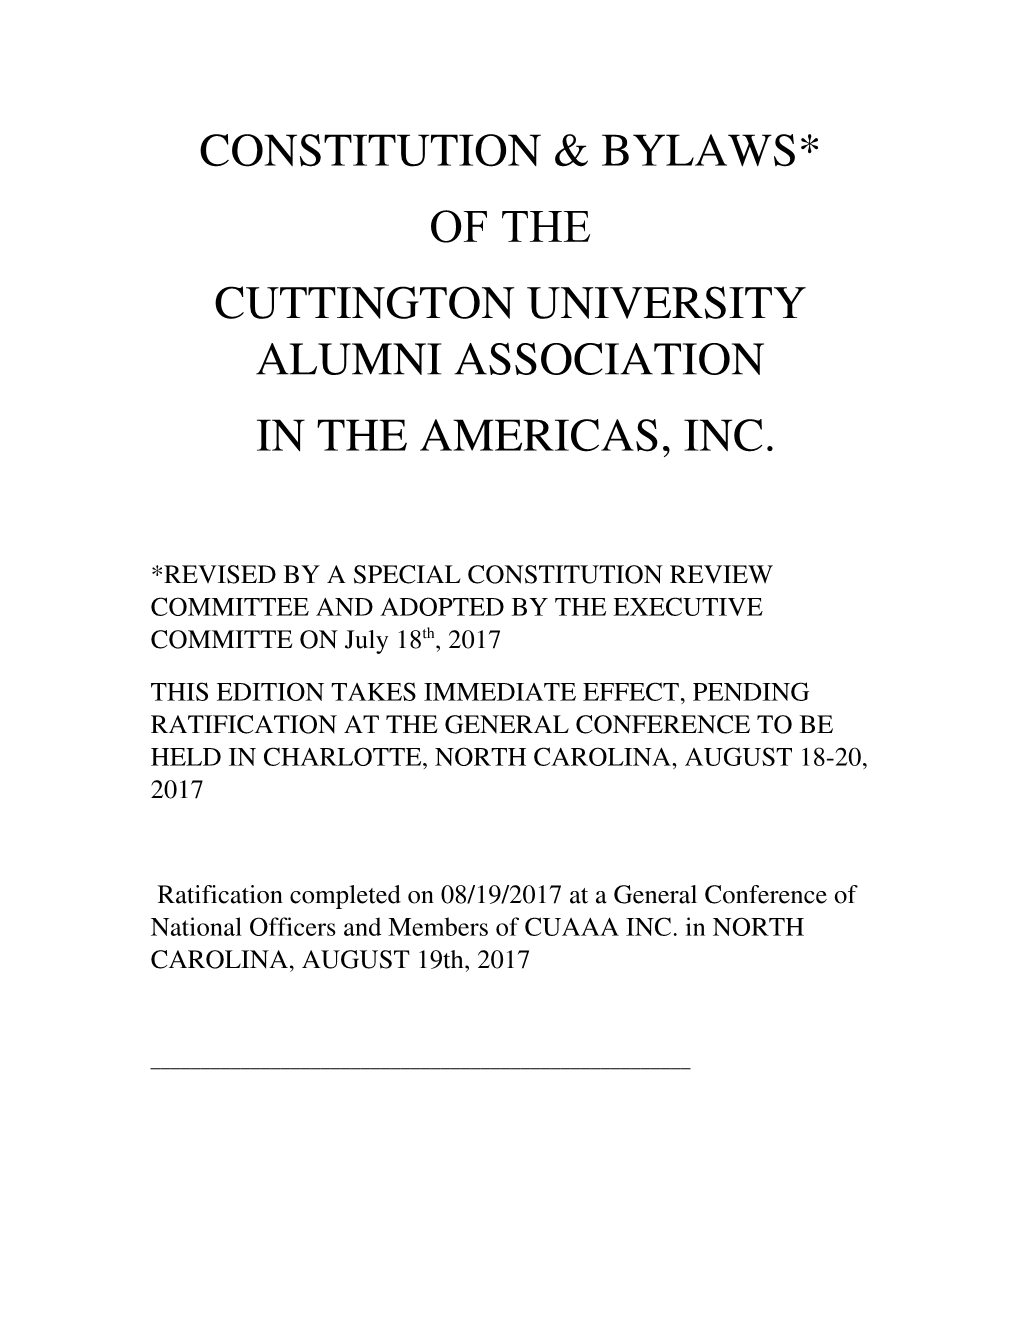 Constitution & Bylaws* of the Cuttington University